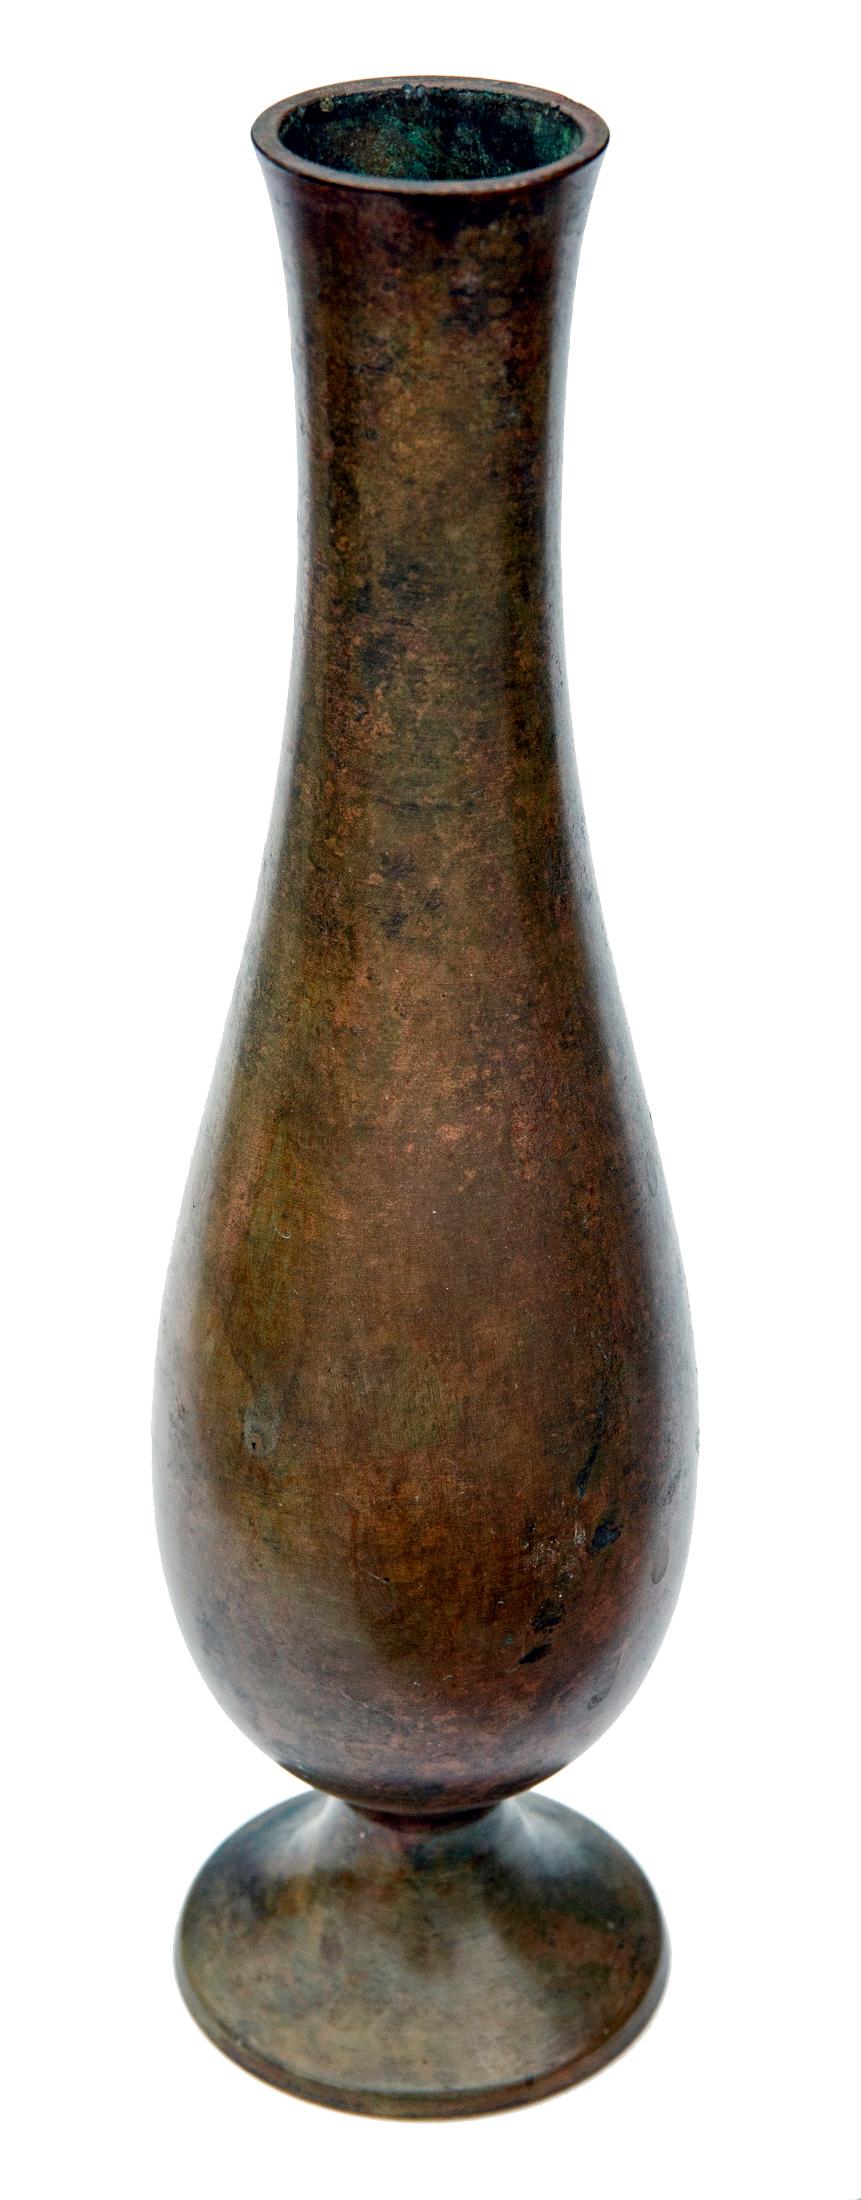 Smooth bronze vase with a mottled surface. The vessel sits on a round base. Unmarked & in excellent condition.